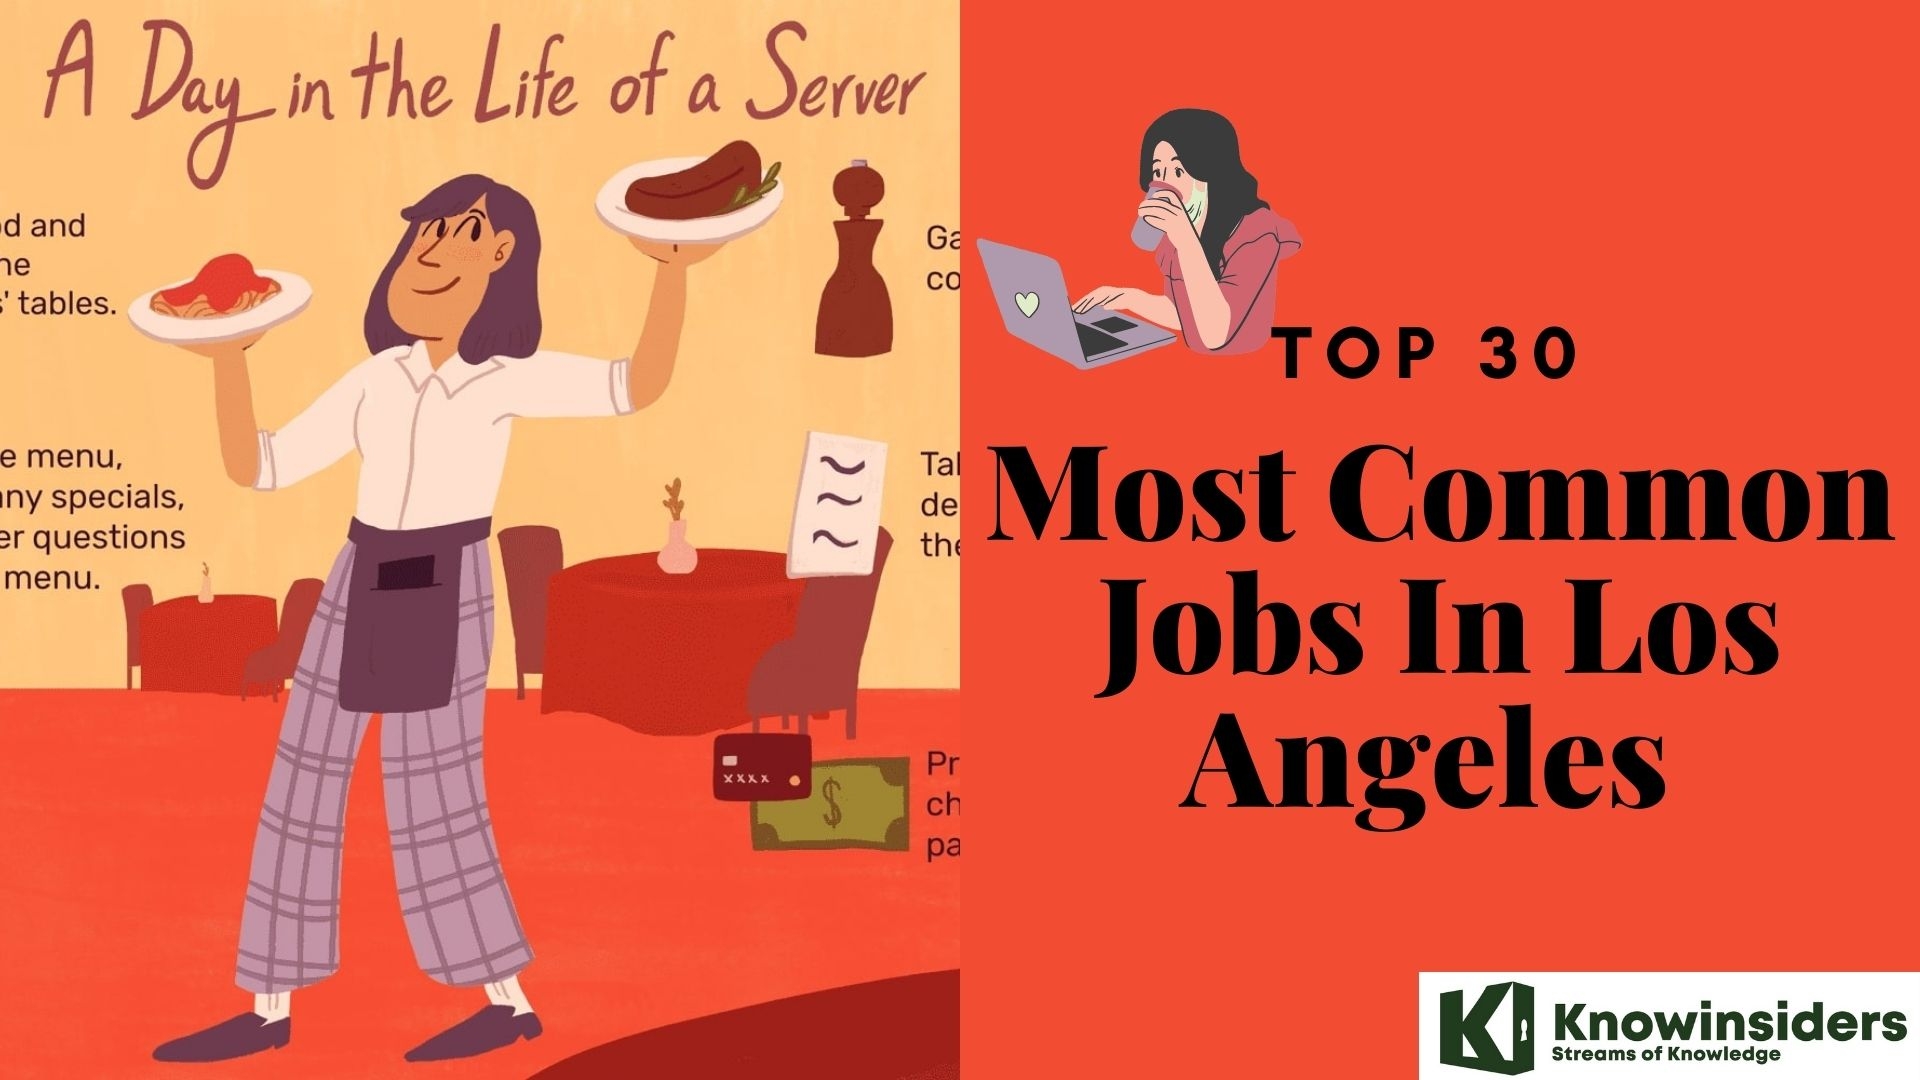 Top 30 Most Common Jobs and Average Salary In Los Angeles 2023/2024